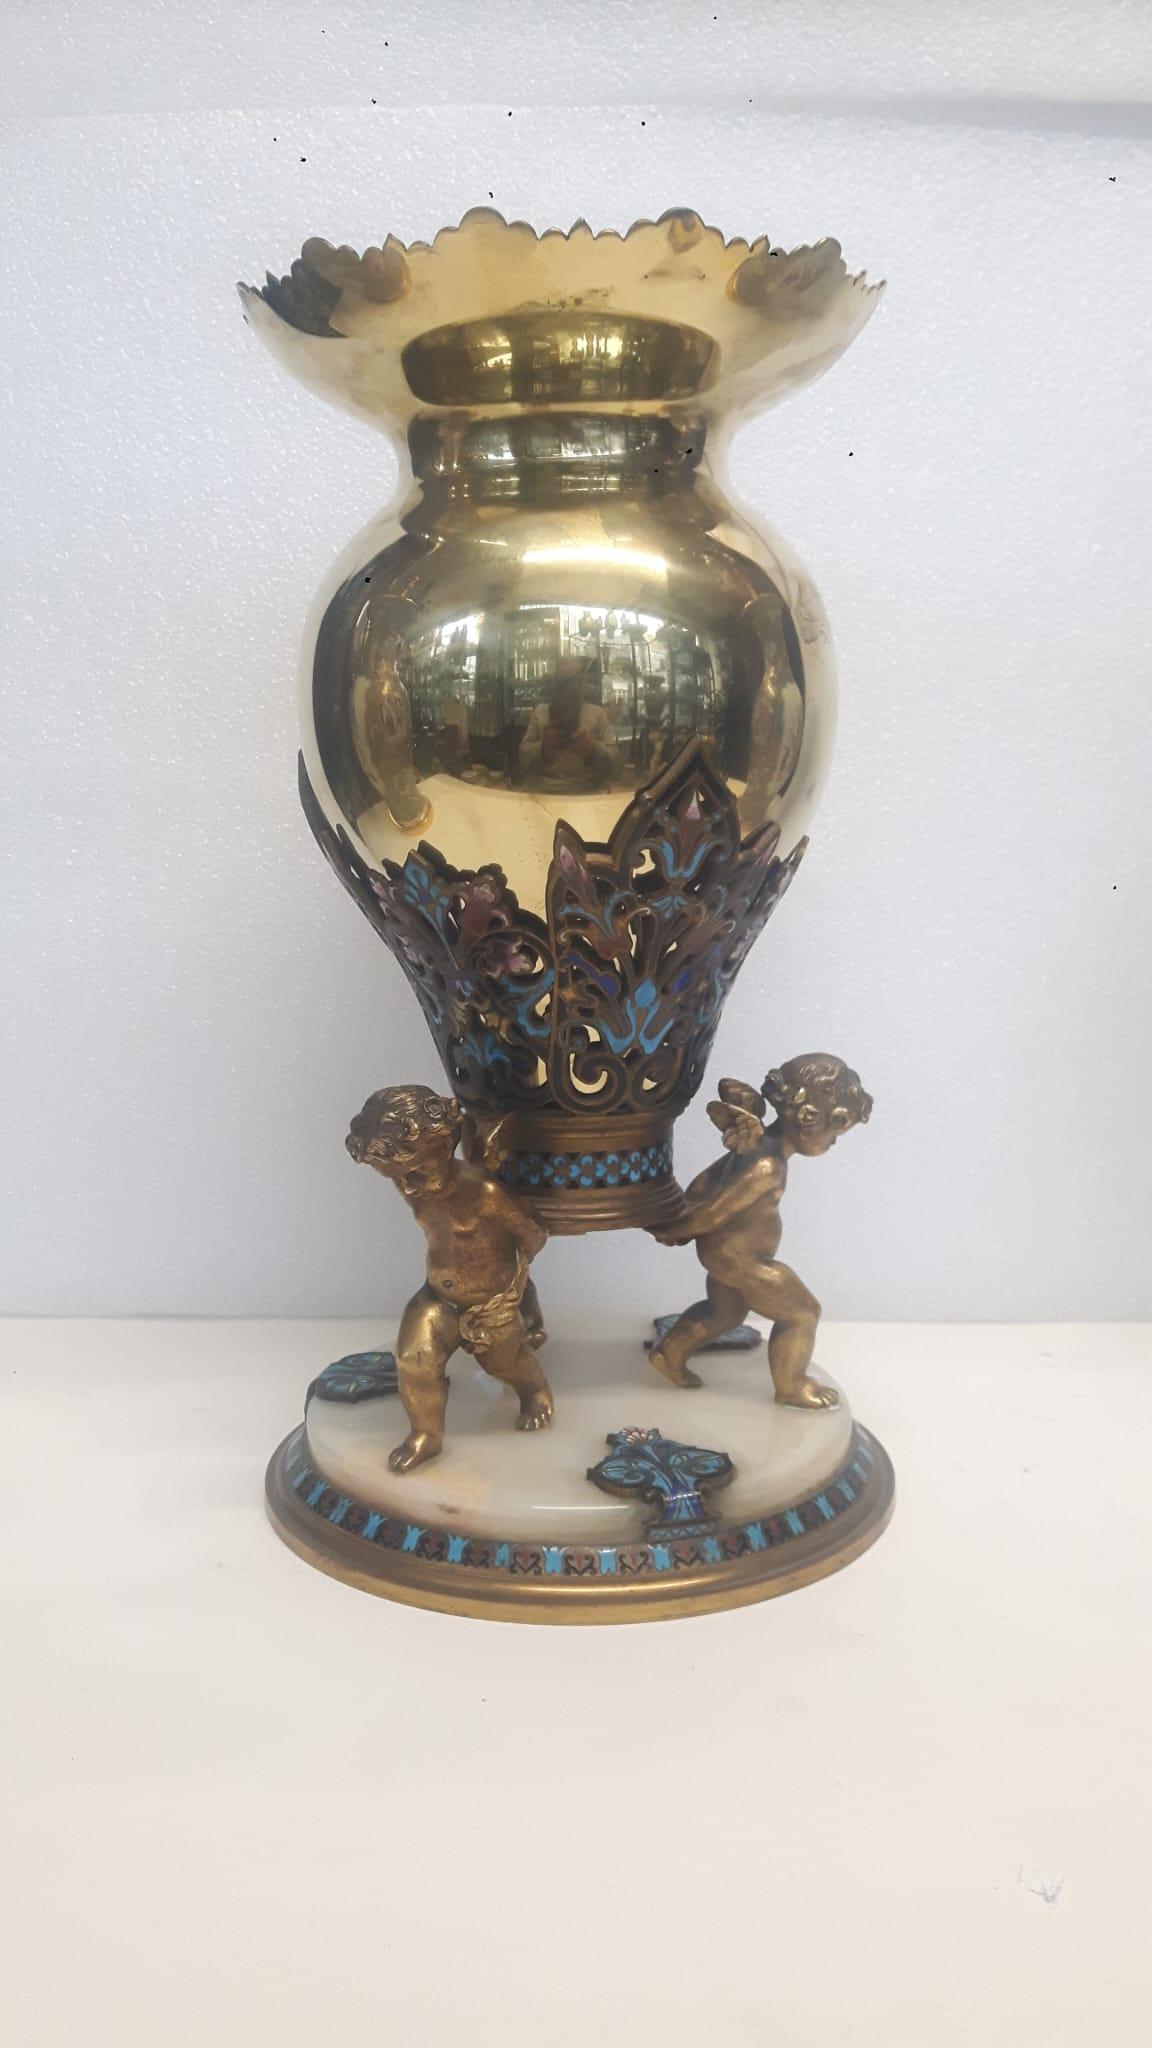 An antique French champlevé enamelled vase with a polished gilt metal body upheld by two putti in gilt bronze on a white marble base,  the border decorated with a turquoise champlevé enamel design. The shapely gadrooned top part of the vase adds a